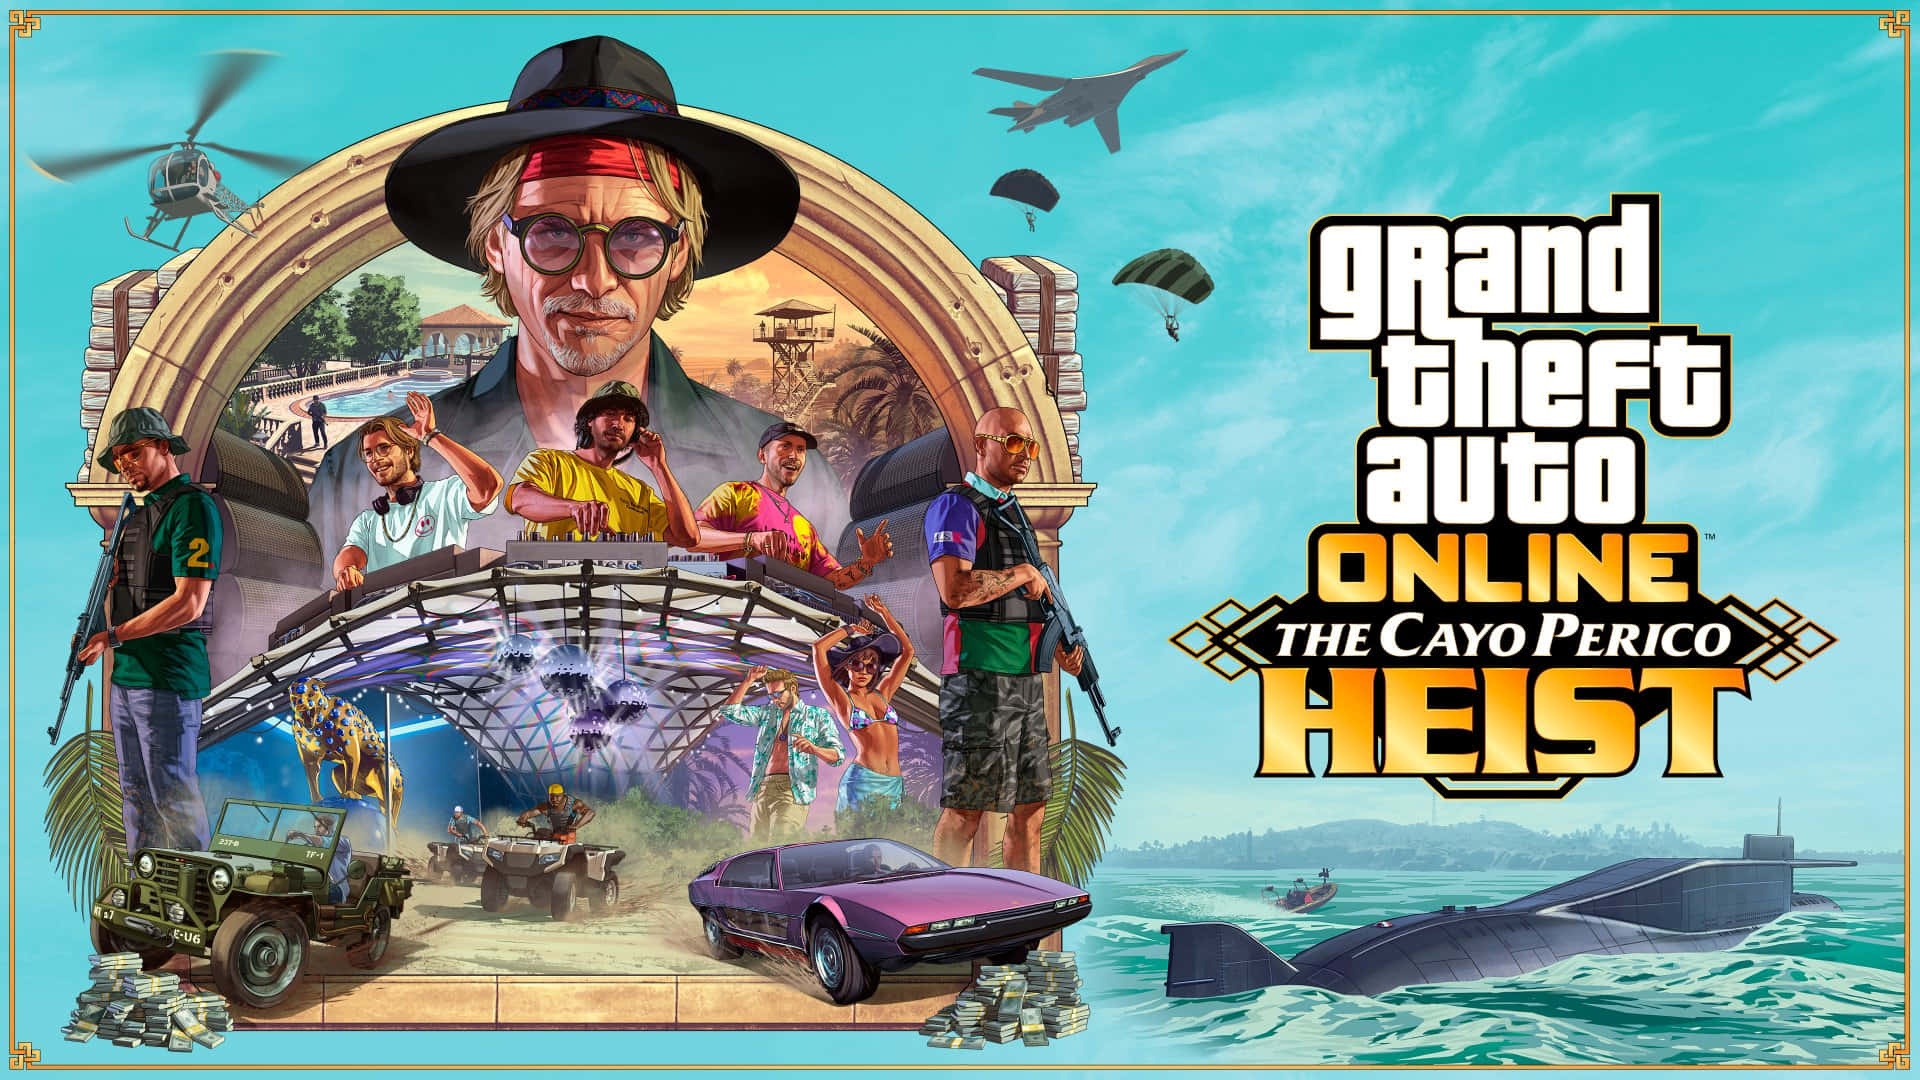 "GTA ONLINE providing the ultimate gaming experience" Wallpaper